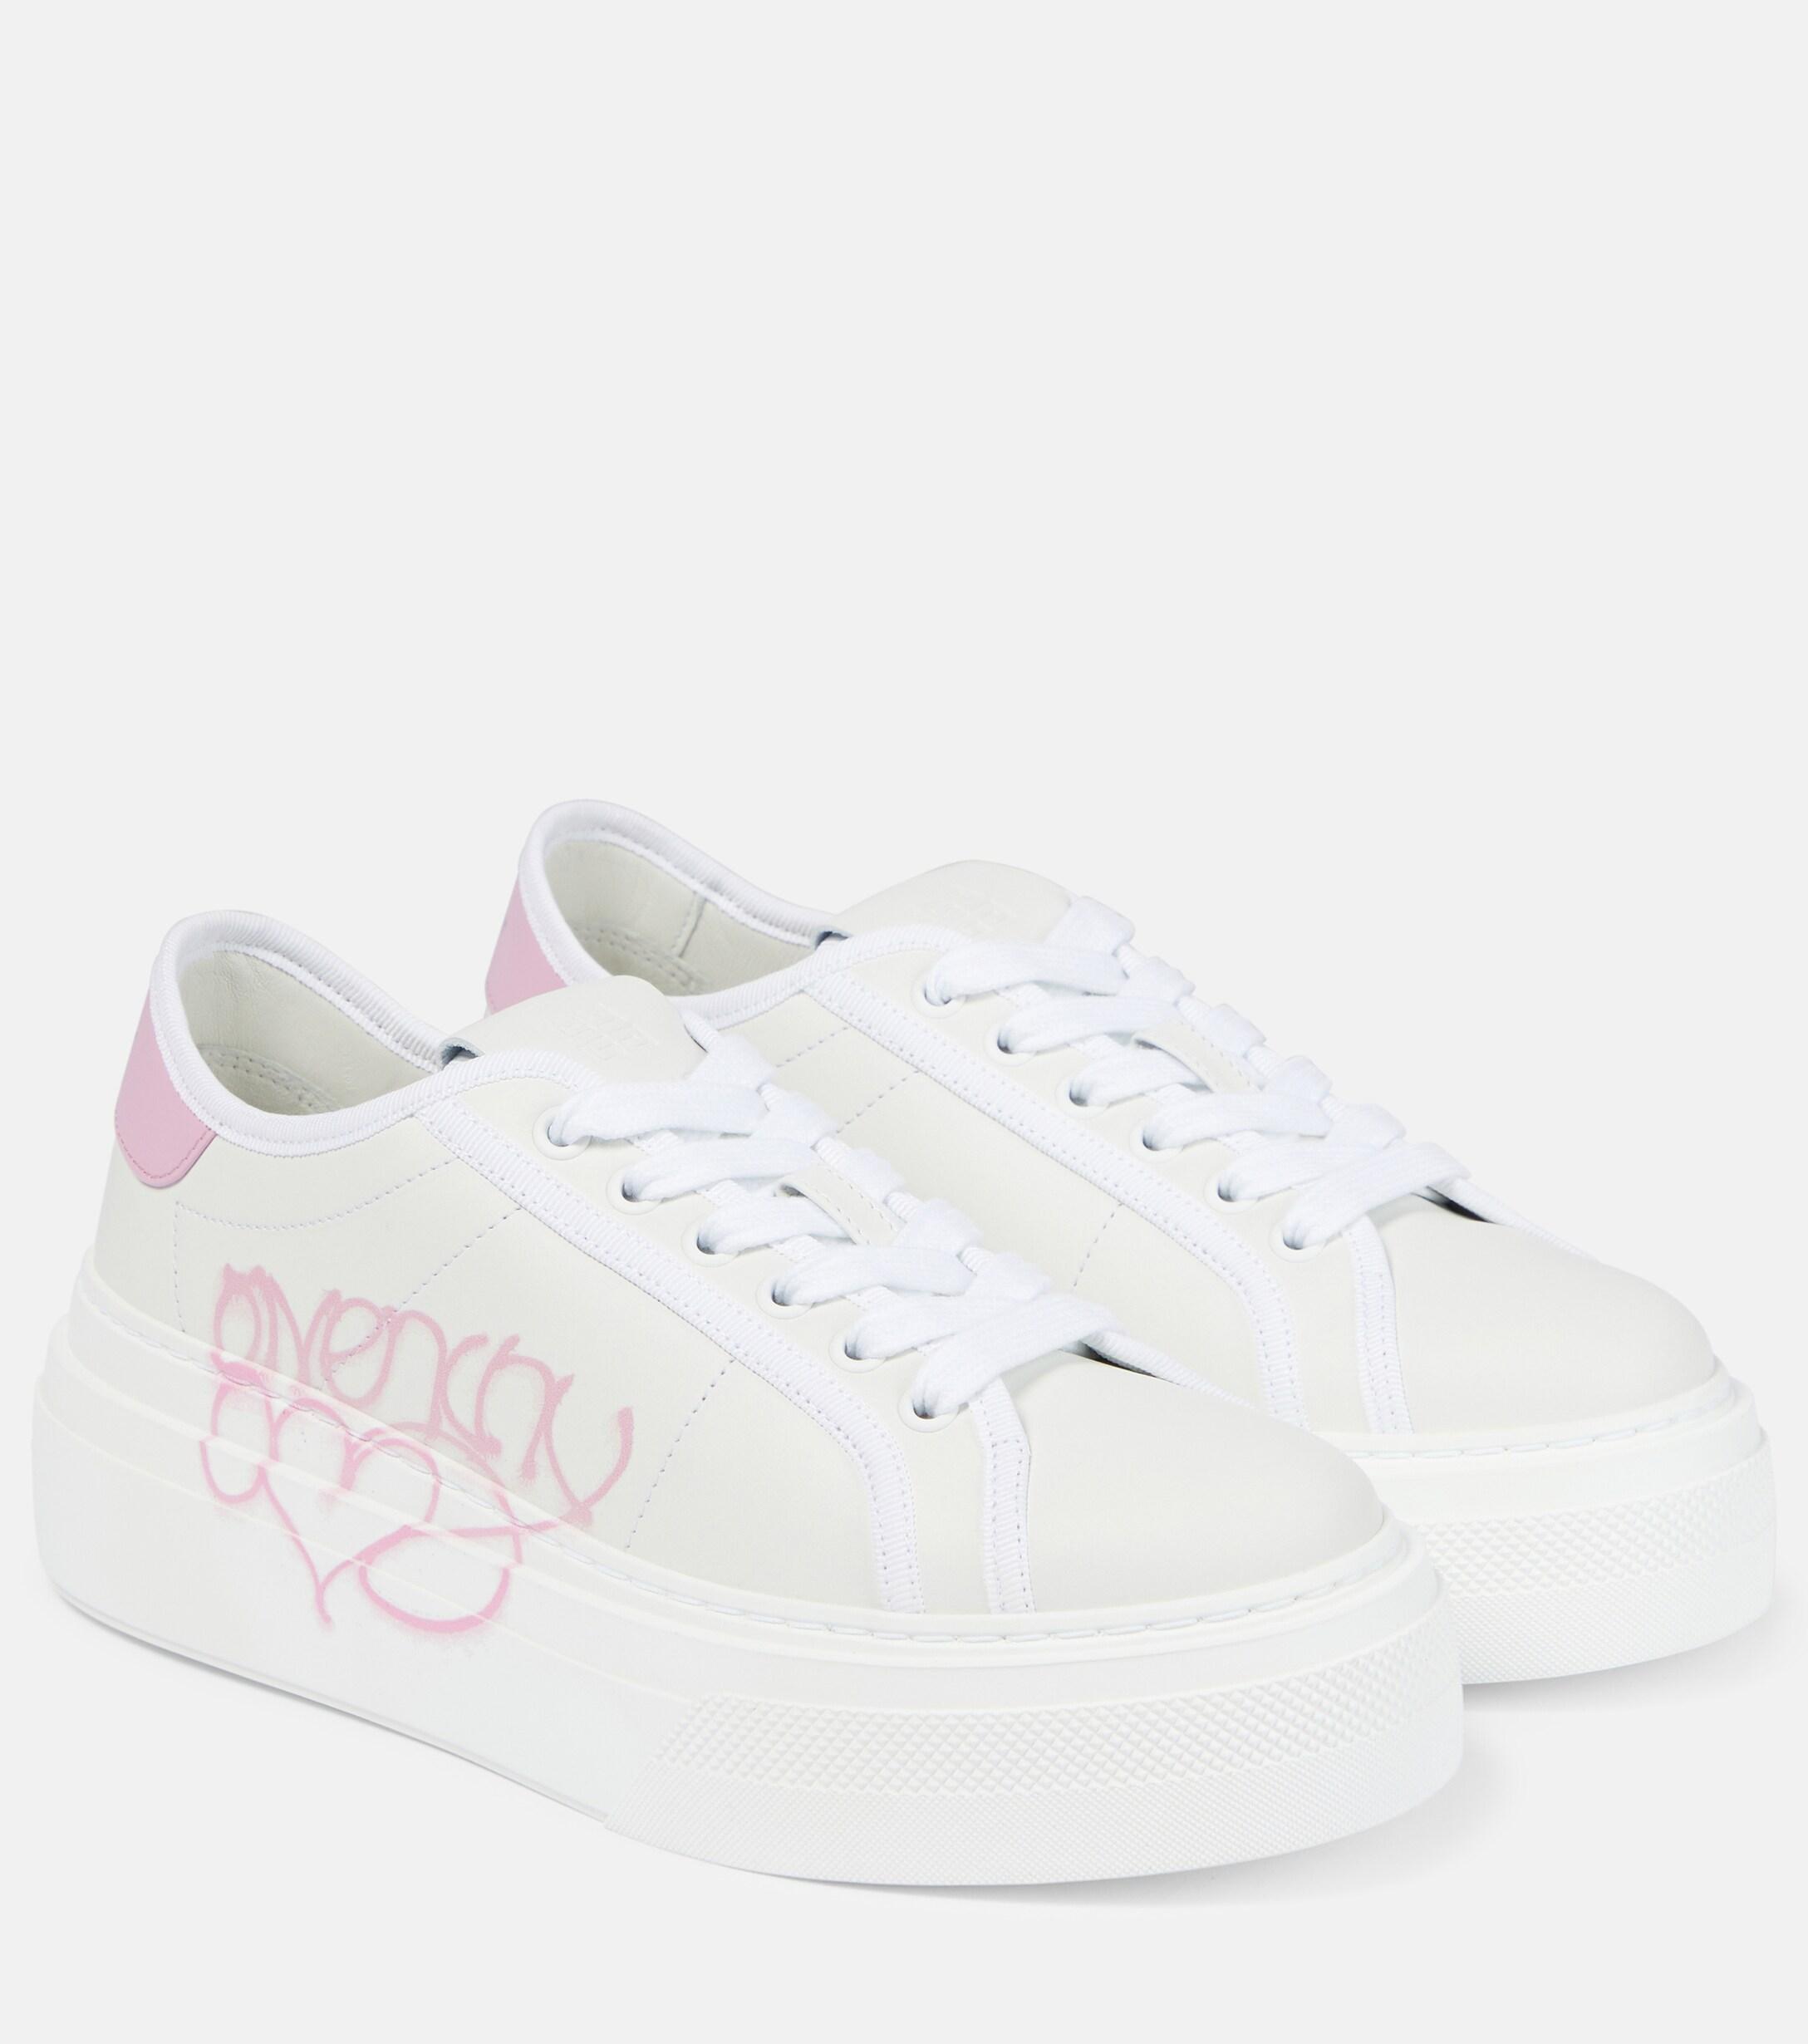 Givenchy X Chito City Platform Leather Sneakers in White | Lyst UK